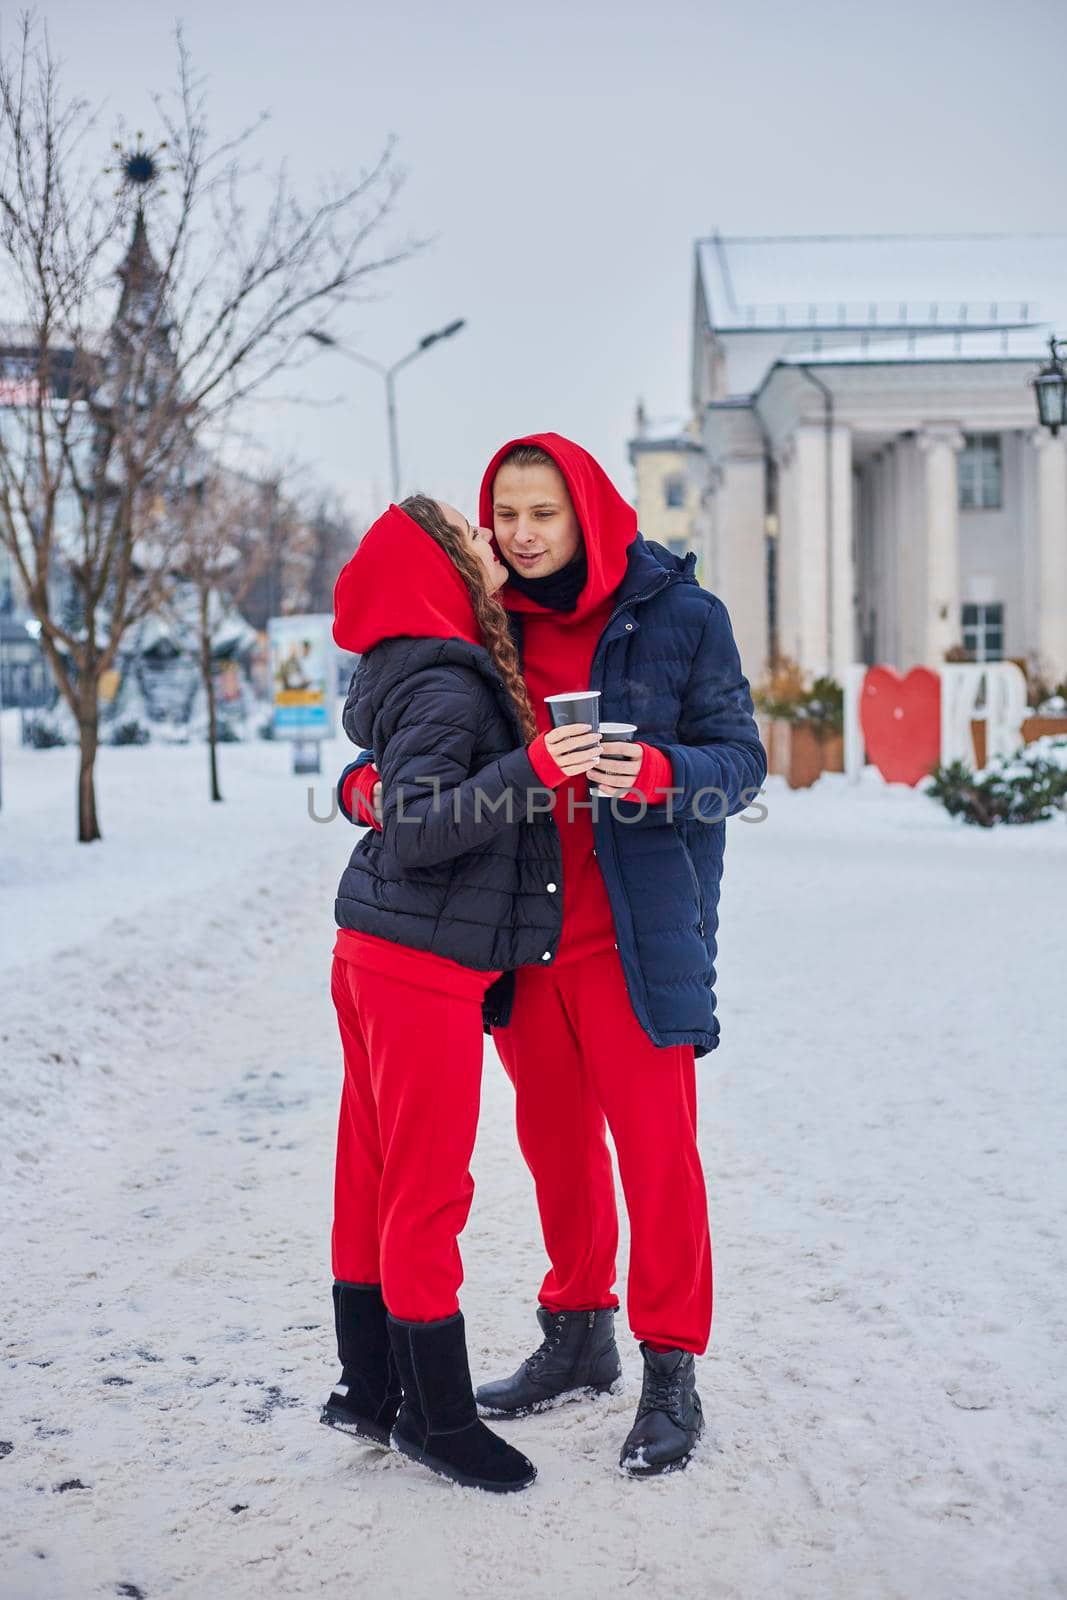 young family guy and girl spend the day in the park on a snowy day. the guy hugs the girl while standing on the street, they drink coffee together